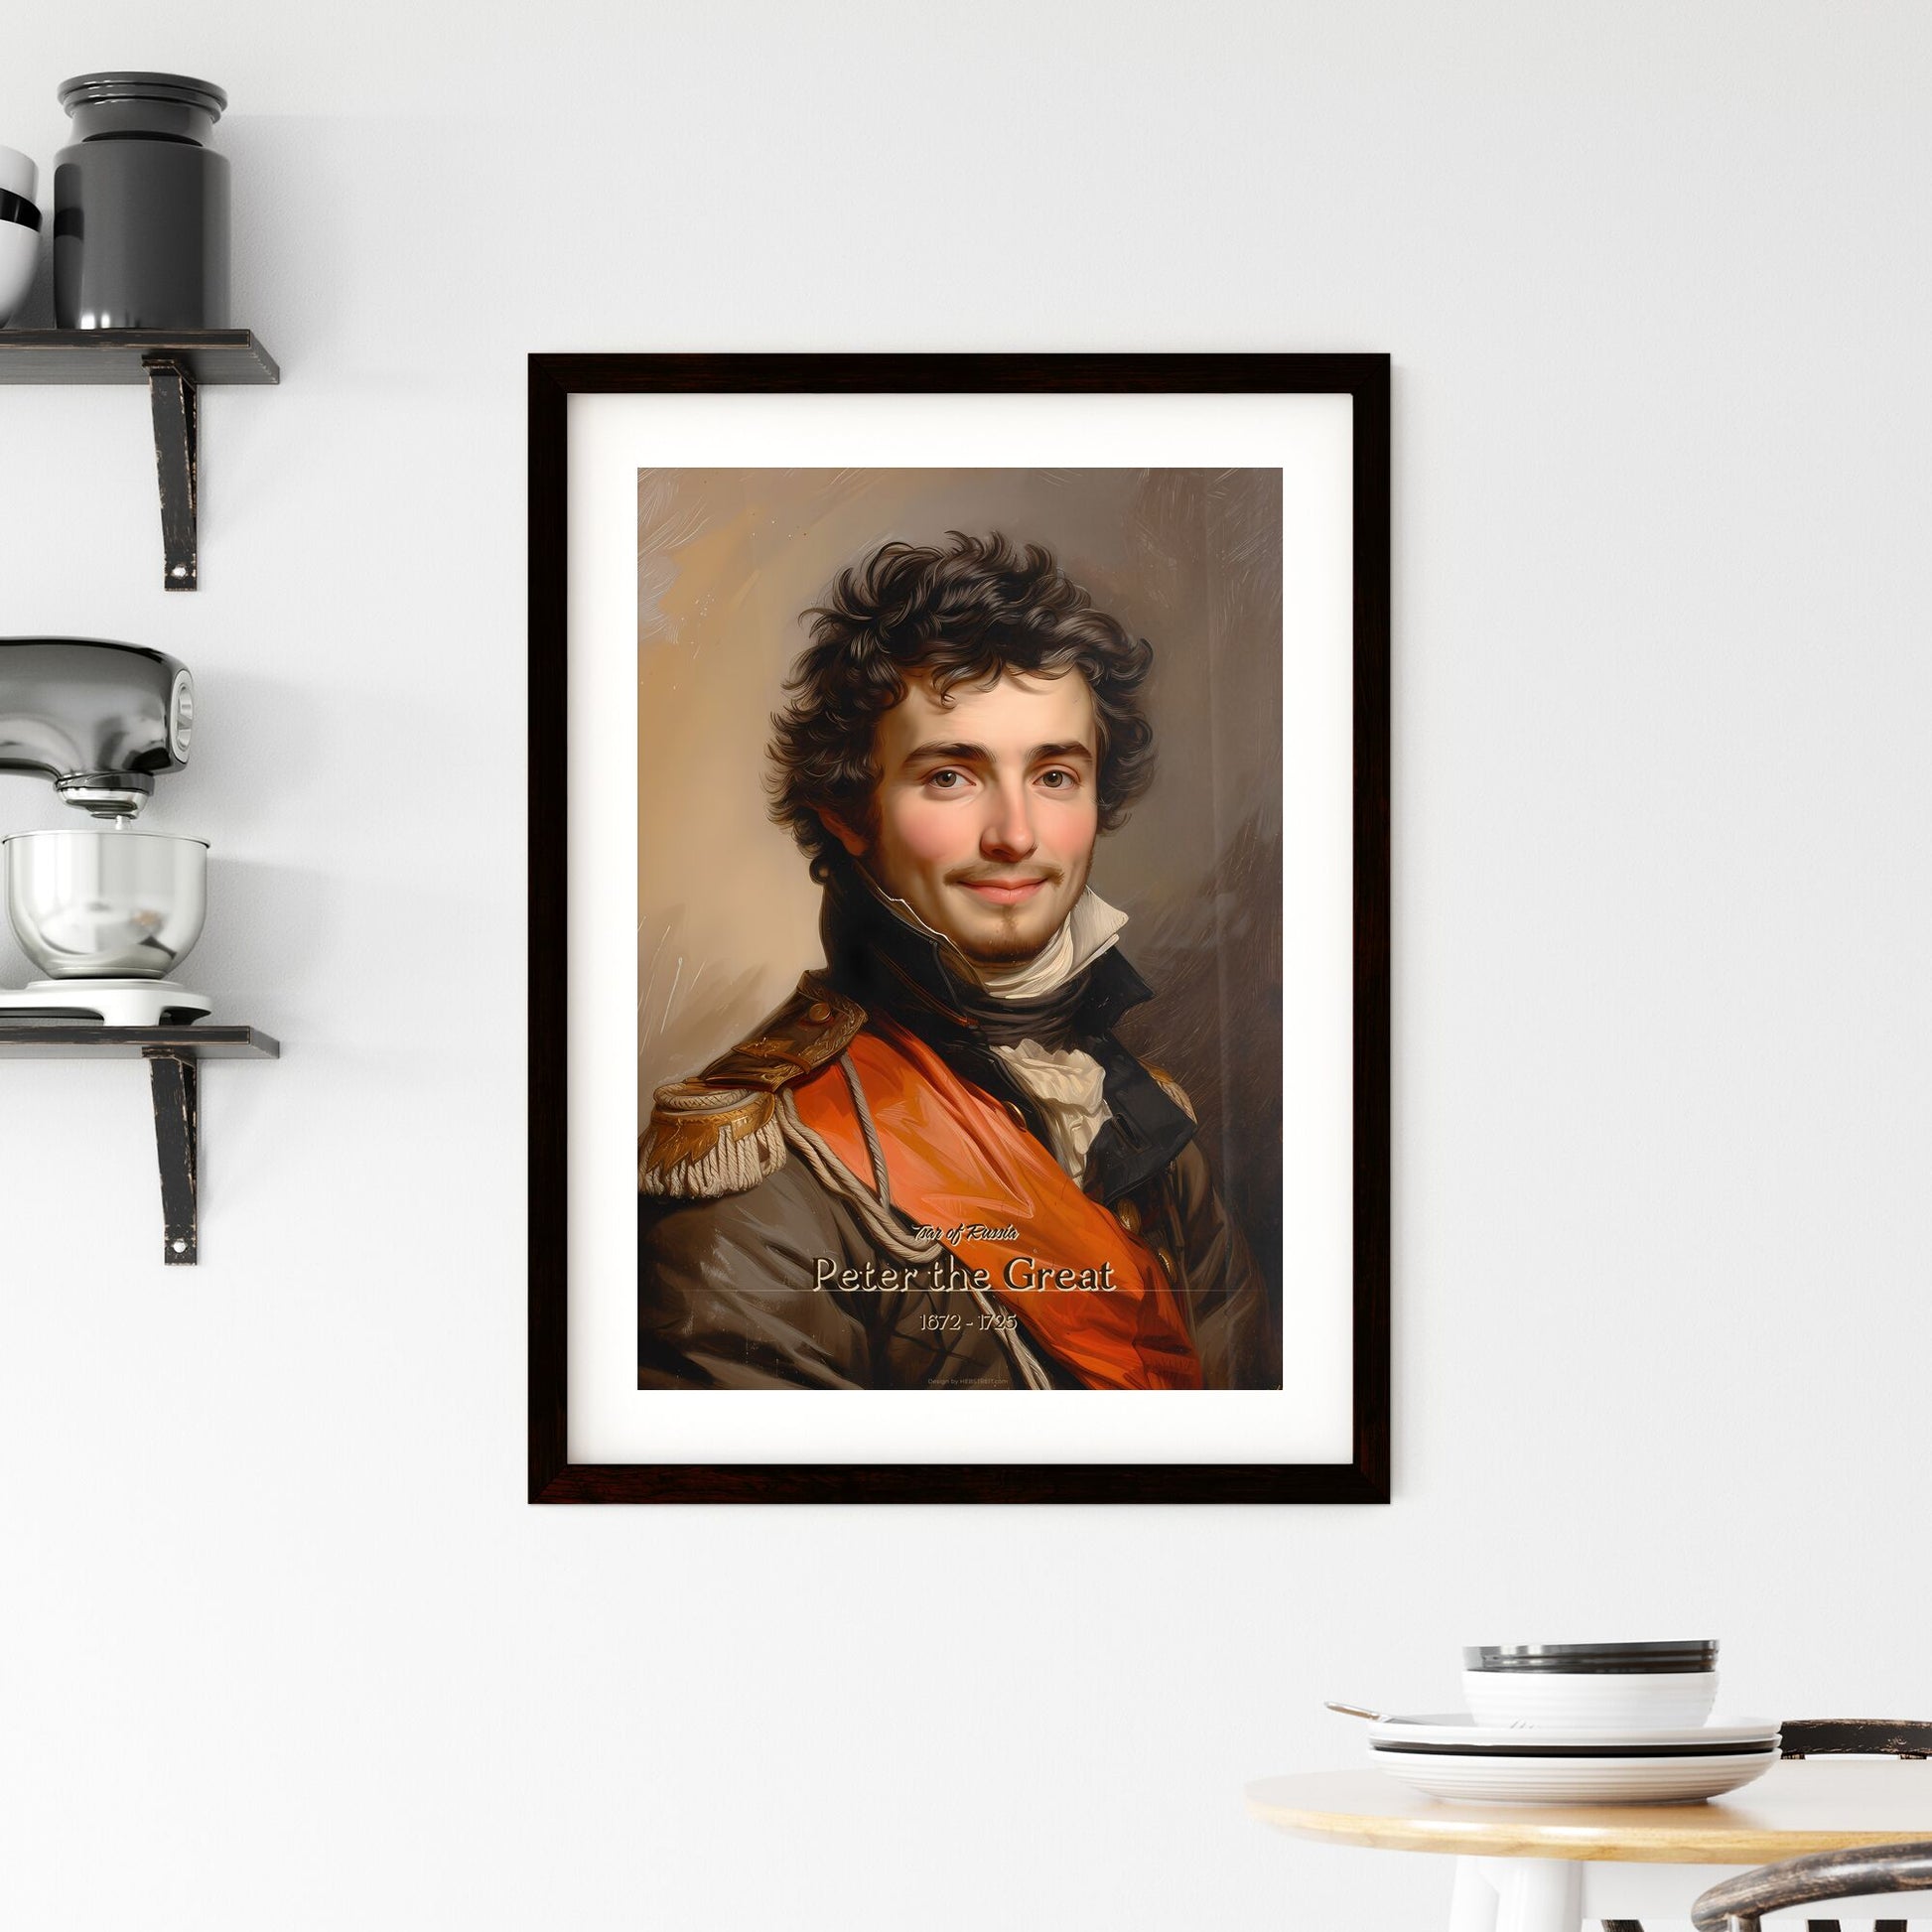 Tsar of Russia, Peter the Great , 1672 - 1725, A Poster of a man in a military uniform Default Title